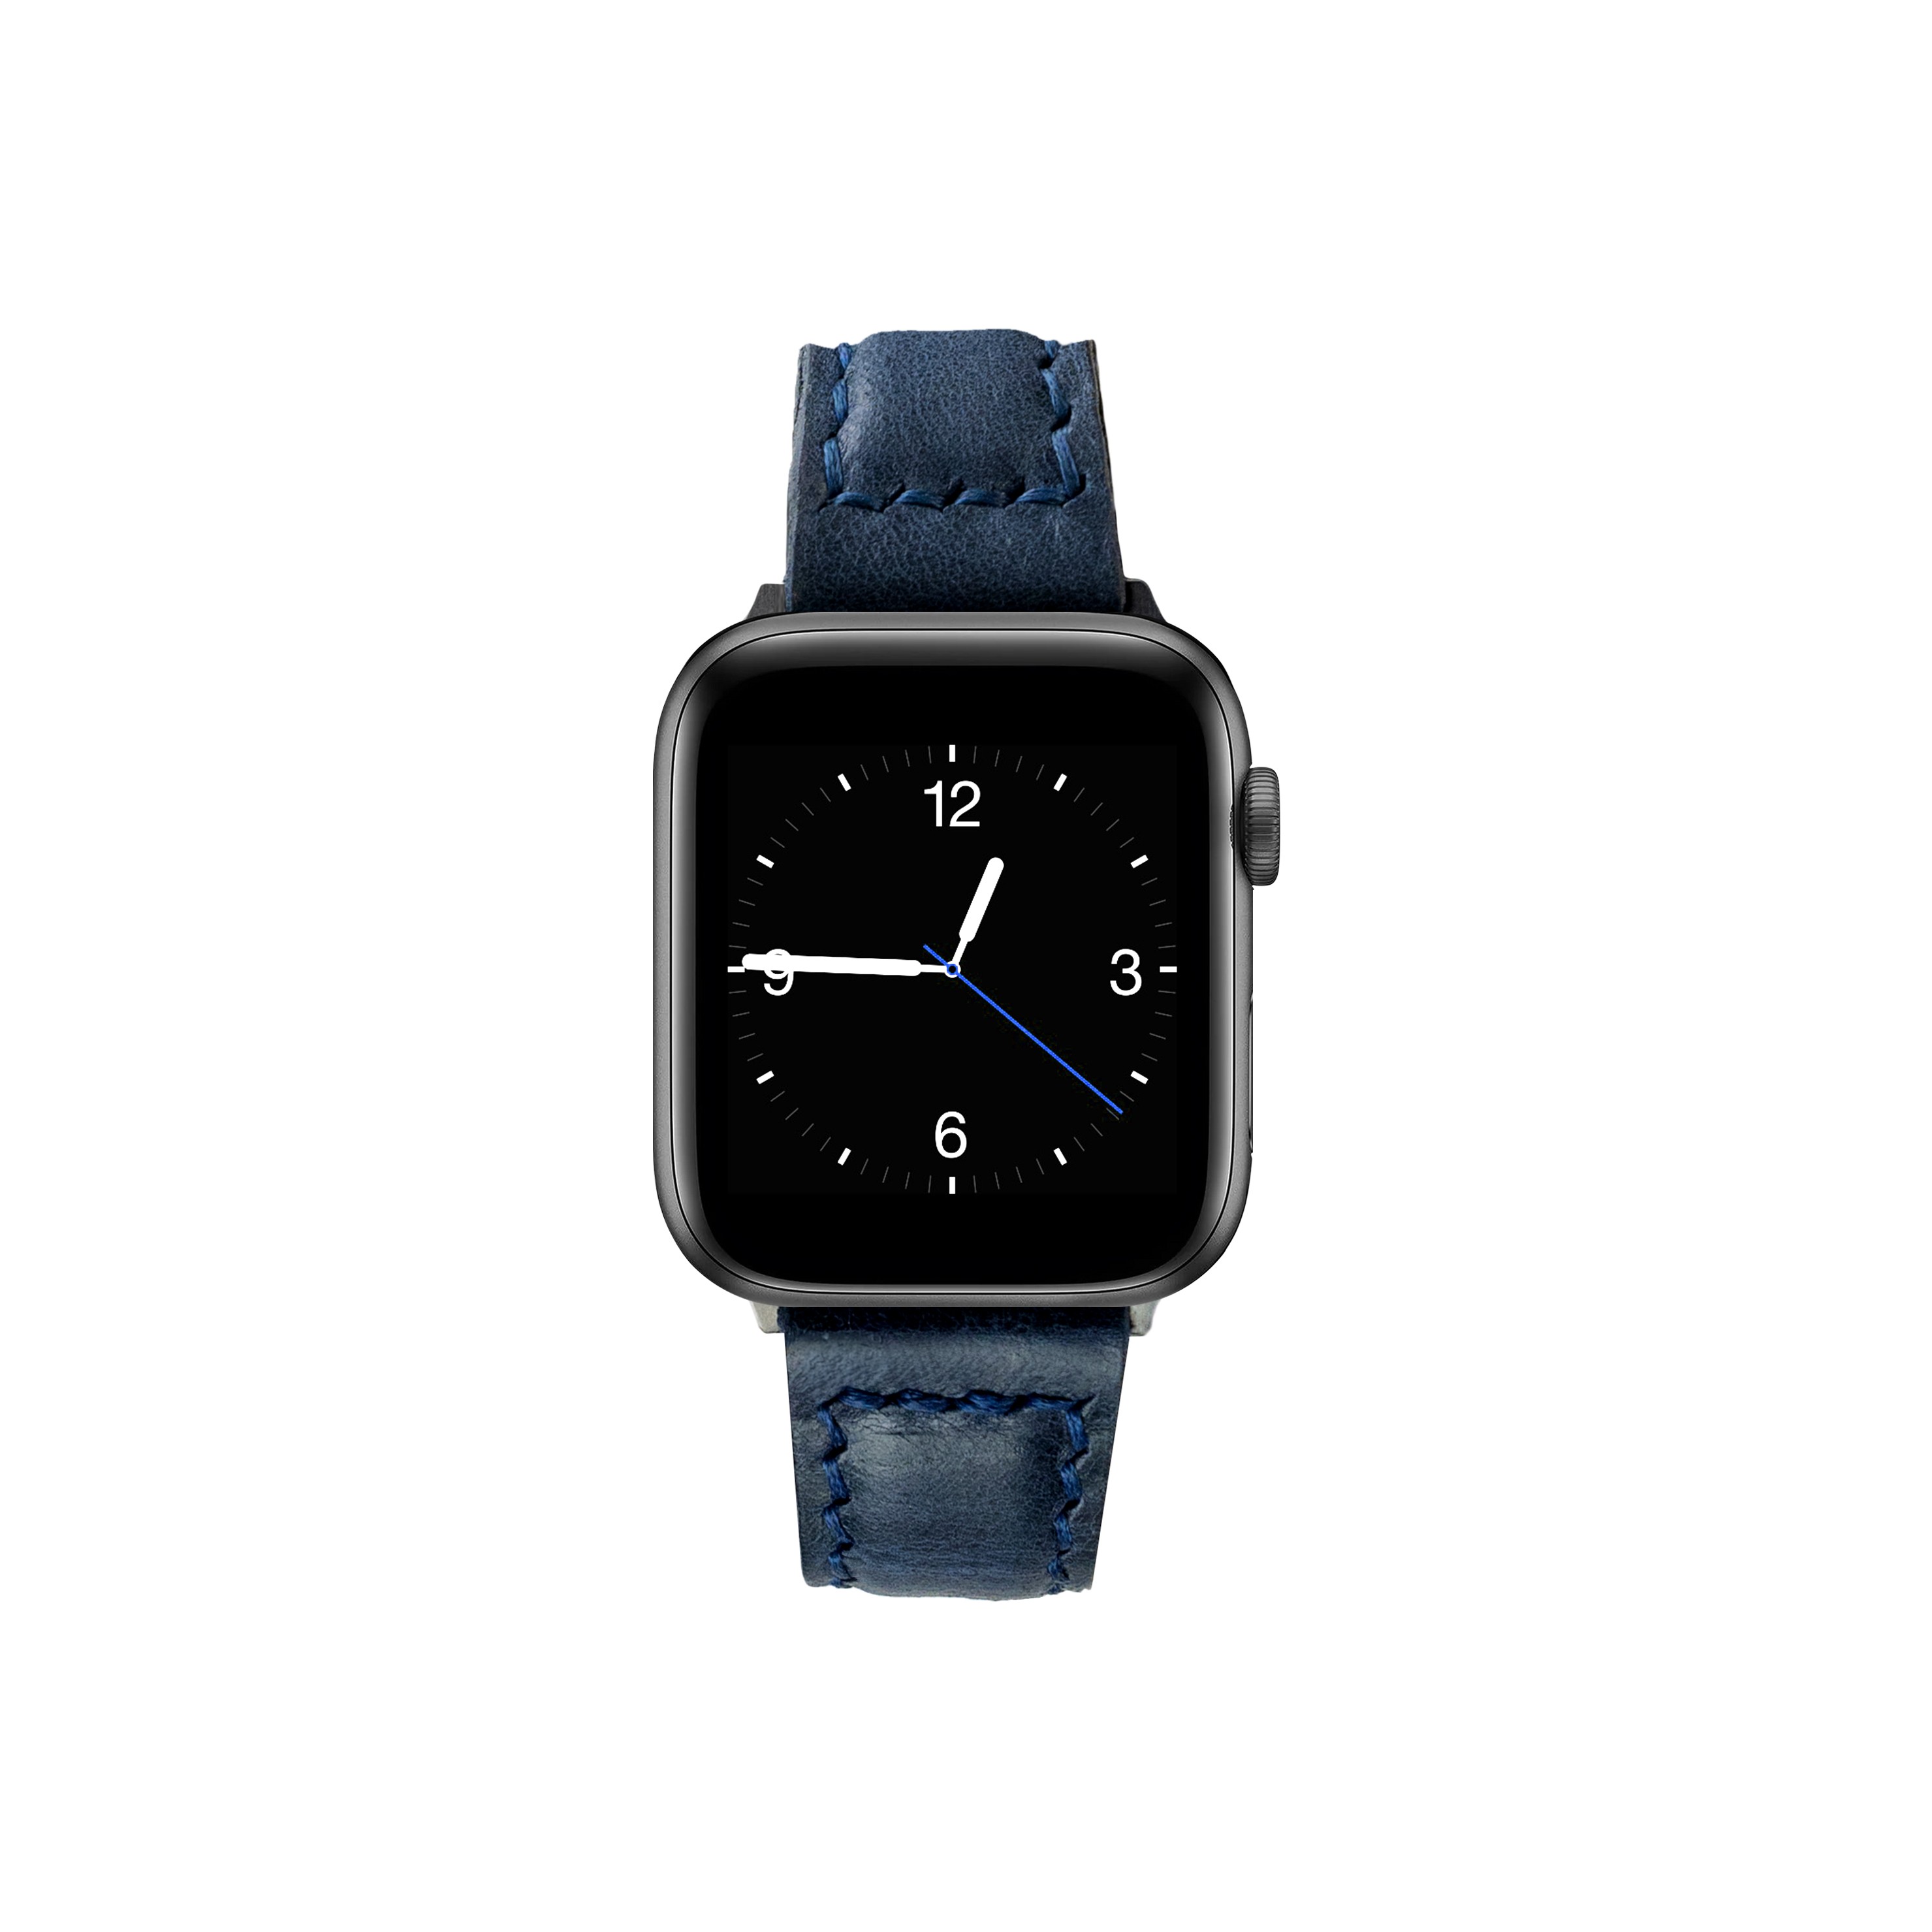 Apple Watch Double Layer Leather Band - Navy Blue